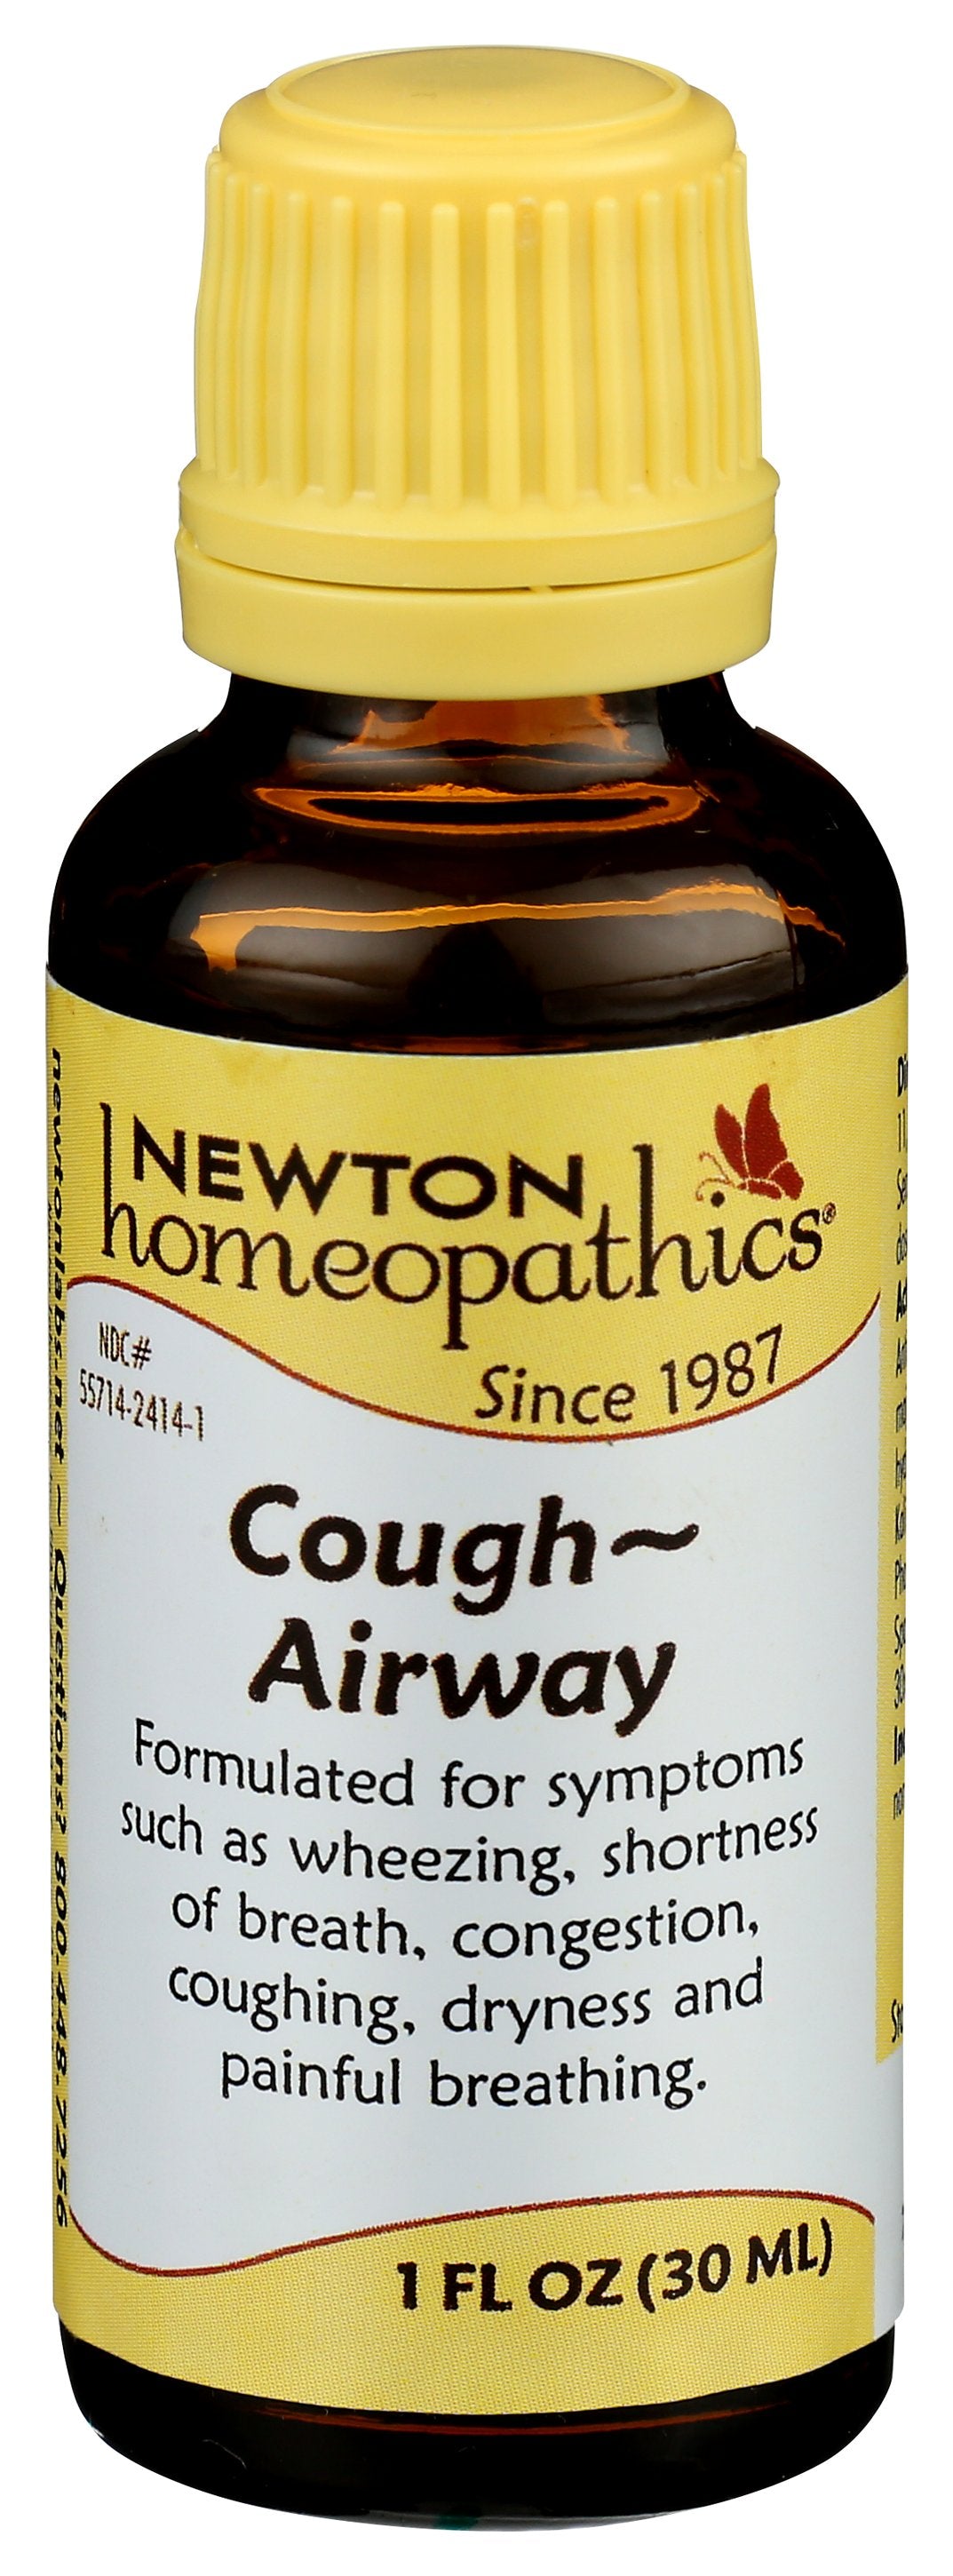 NEWTON HOMEOPATHICS COUGH AIRWAY